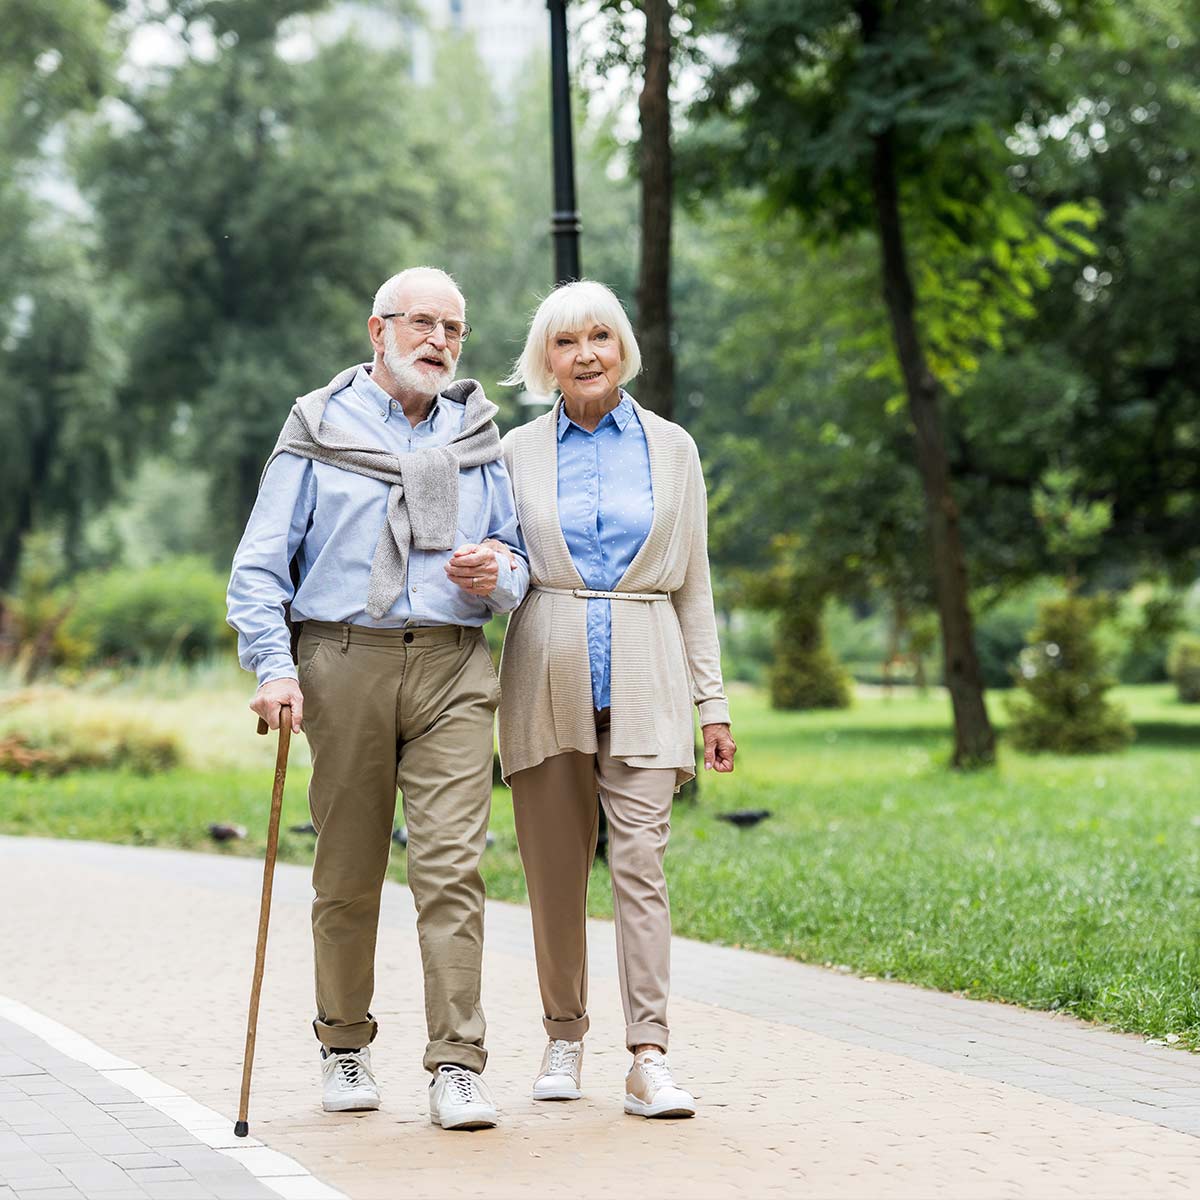 couple walking in park with arms locked guaranteed retirement income tallahassee fl